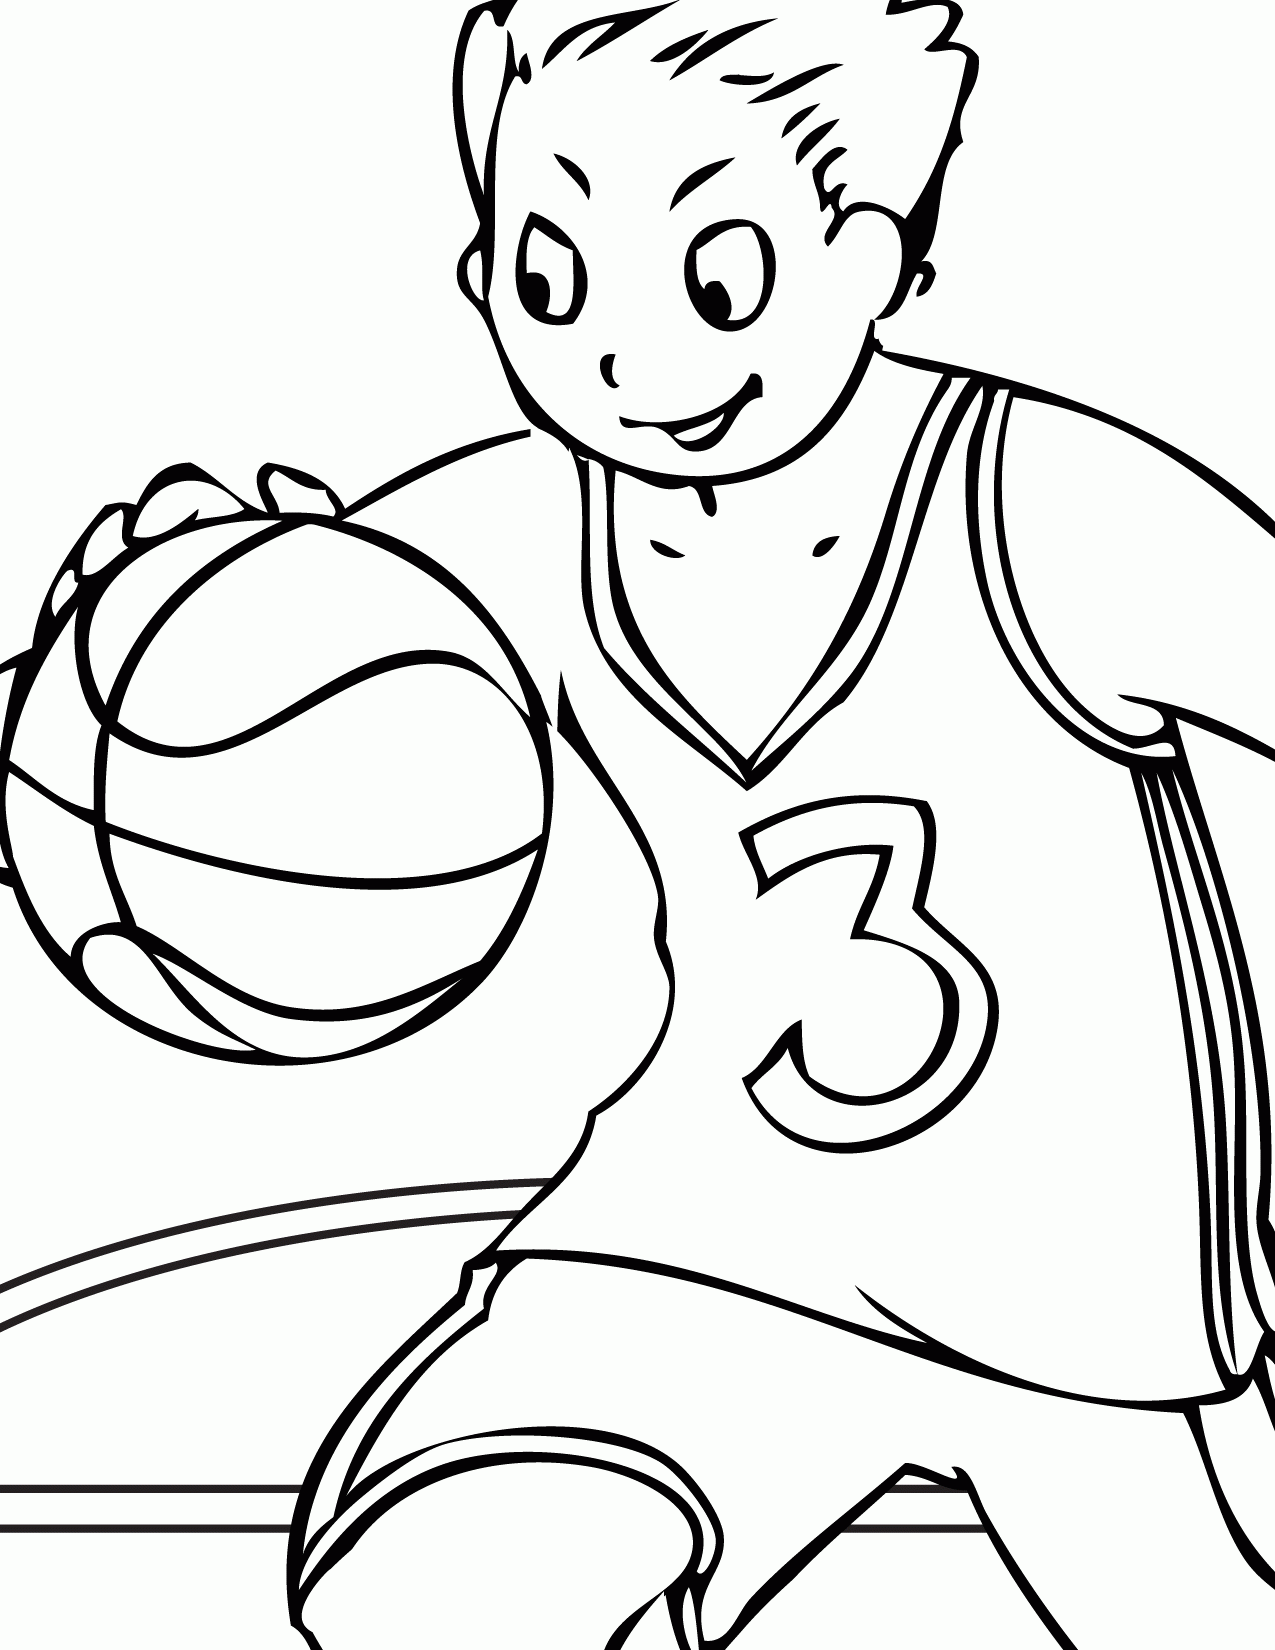 Coloring Pages Of Kids Playing Sports Coloring Home